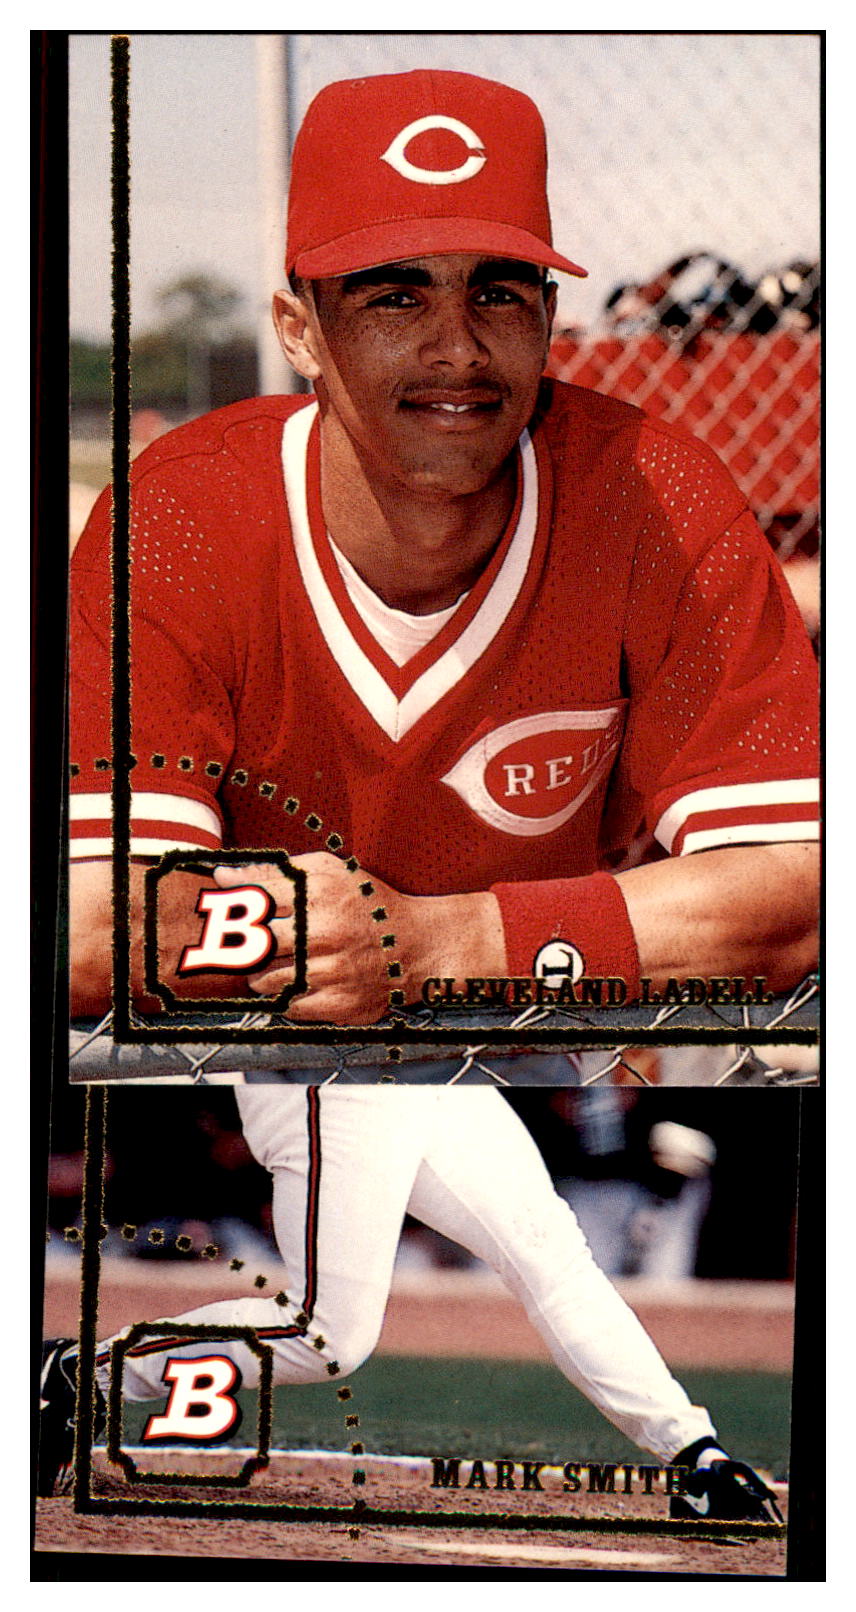 1994 Bowman Cleveland
  Ladell   RC Cincinnati Reds Baseball
  Card BOWV3 simple Xclusive Collectibles   